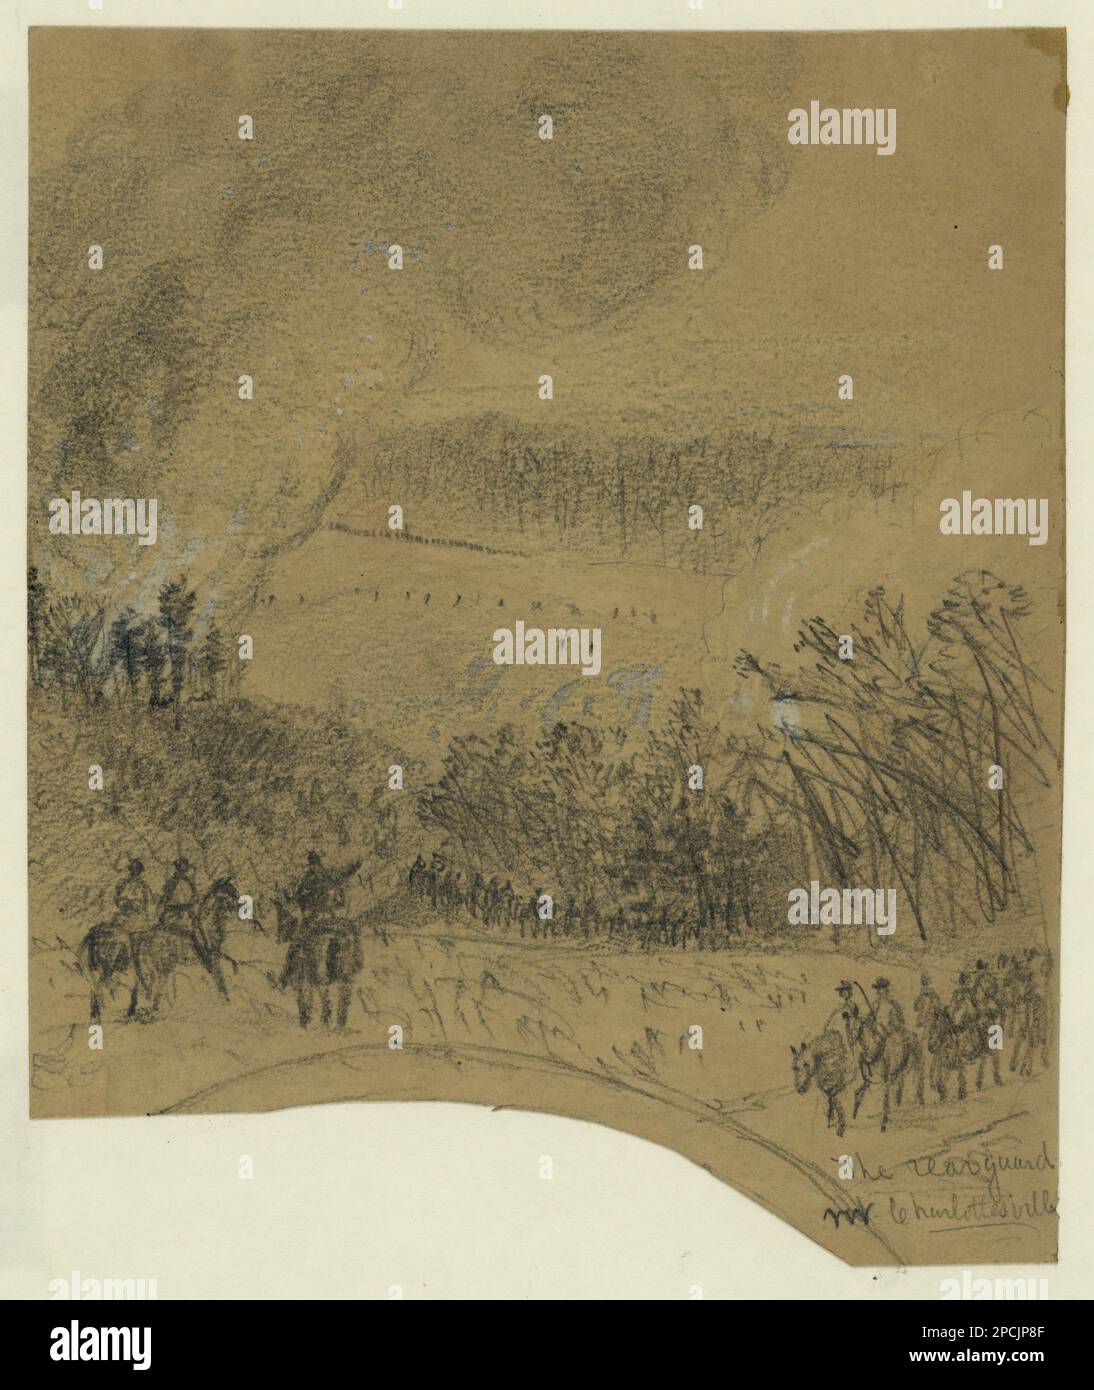 The rear guard nr. Charlottesville. Morgan collection of Civil War drawings. Custer, George Armstrong, 1839-1876, Military service, Military officers, Union, 1860-1870, United States, History, Civil War, 1861-1865, Campaigns & battles, United States, Virginia, Charlottesville , Custer's Raid into Albemarle County, Va. Stock Photo